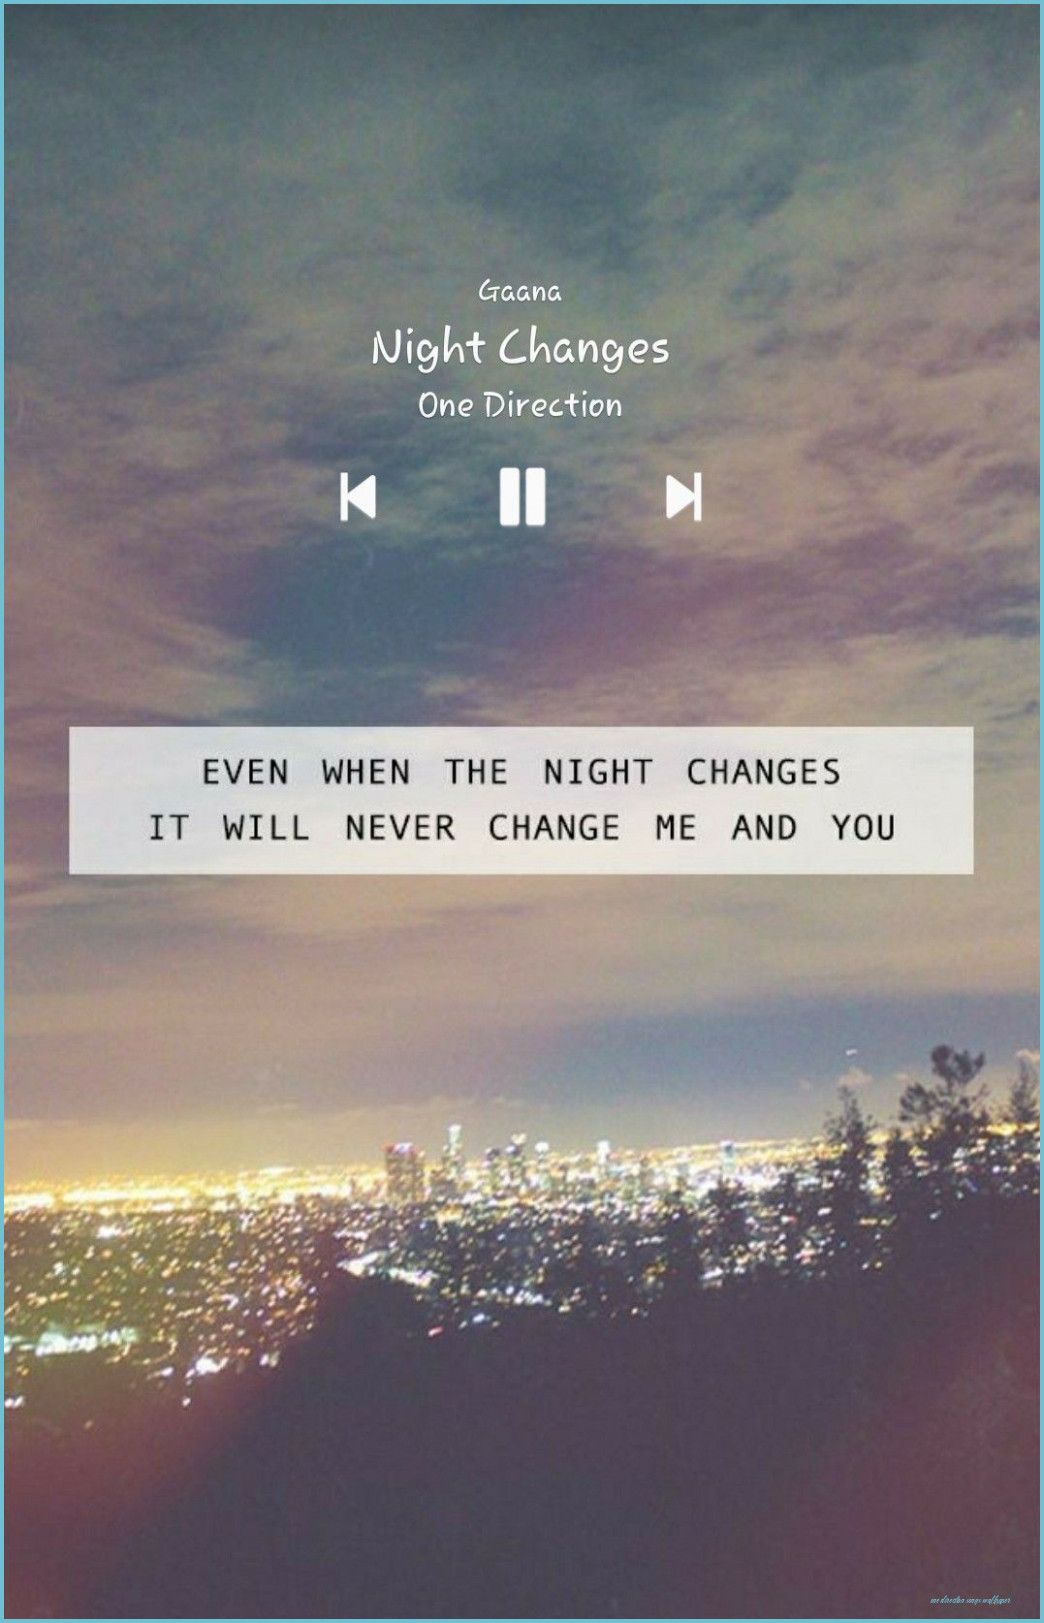 one direction songs night changes